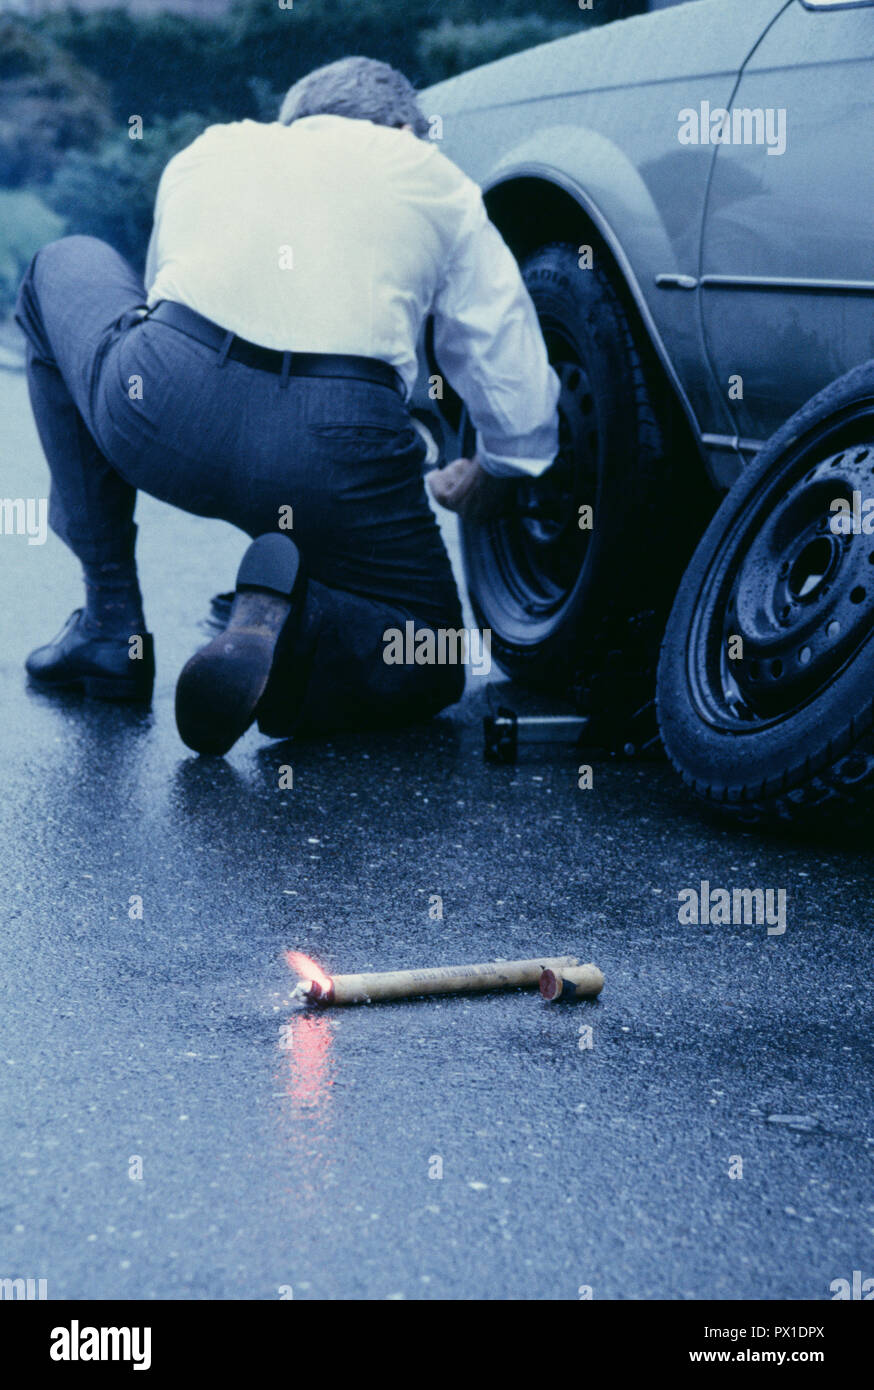 Businessman Changing a Flat Tire in the rain, USA Stock Photo